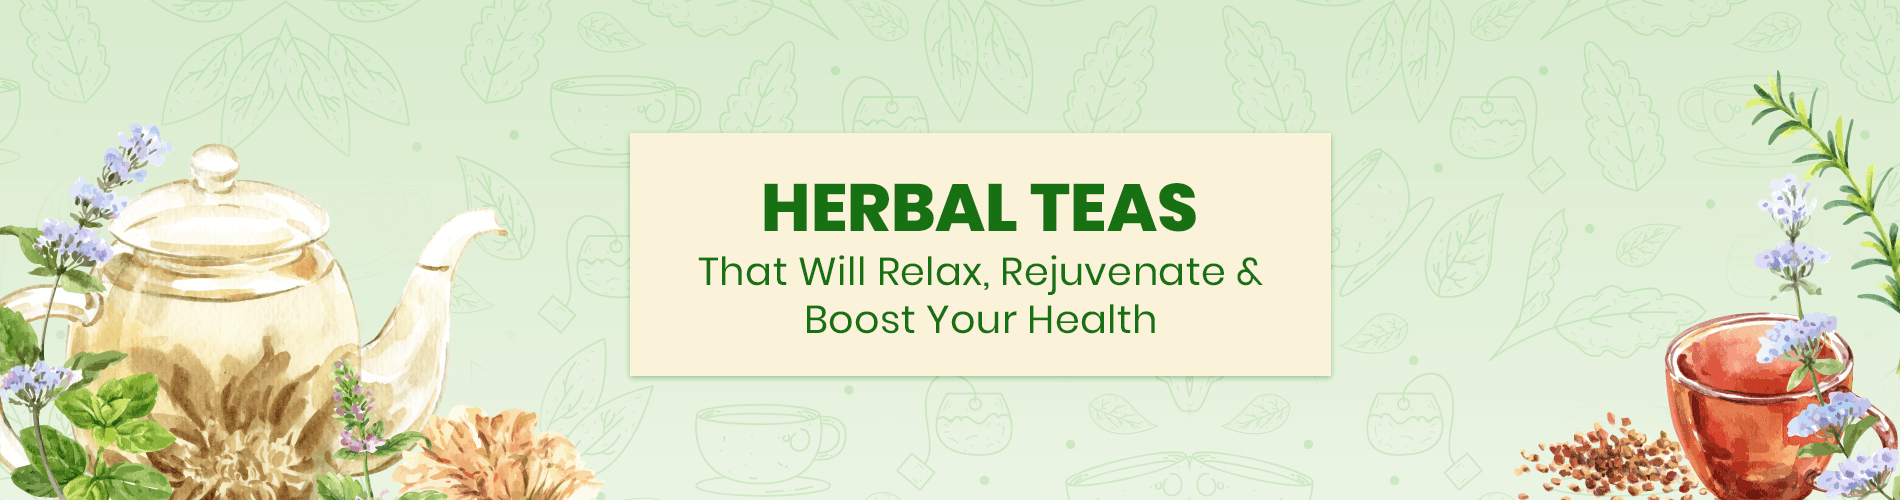 Herbal Teas that will Relax, Rejuvenate and Boost Your Health